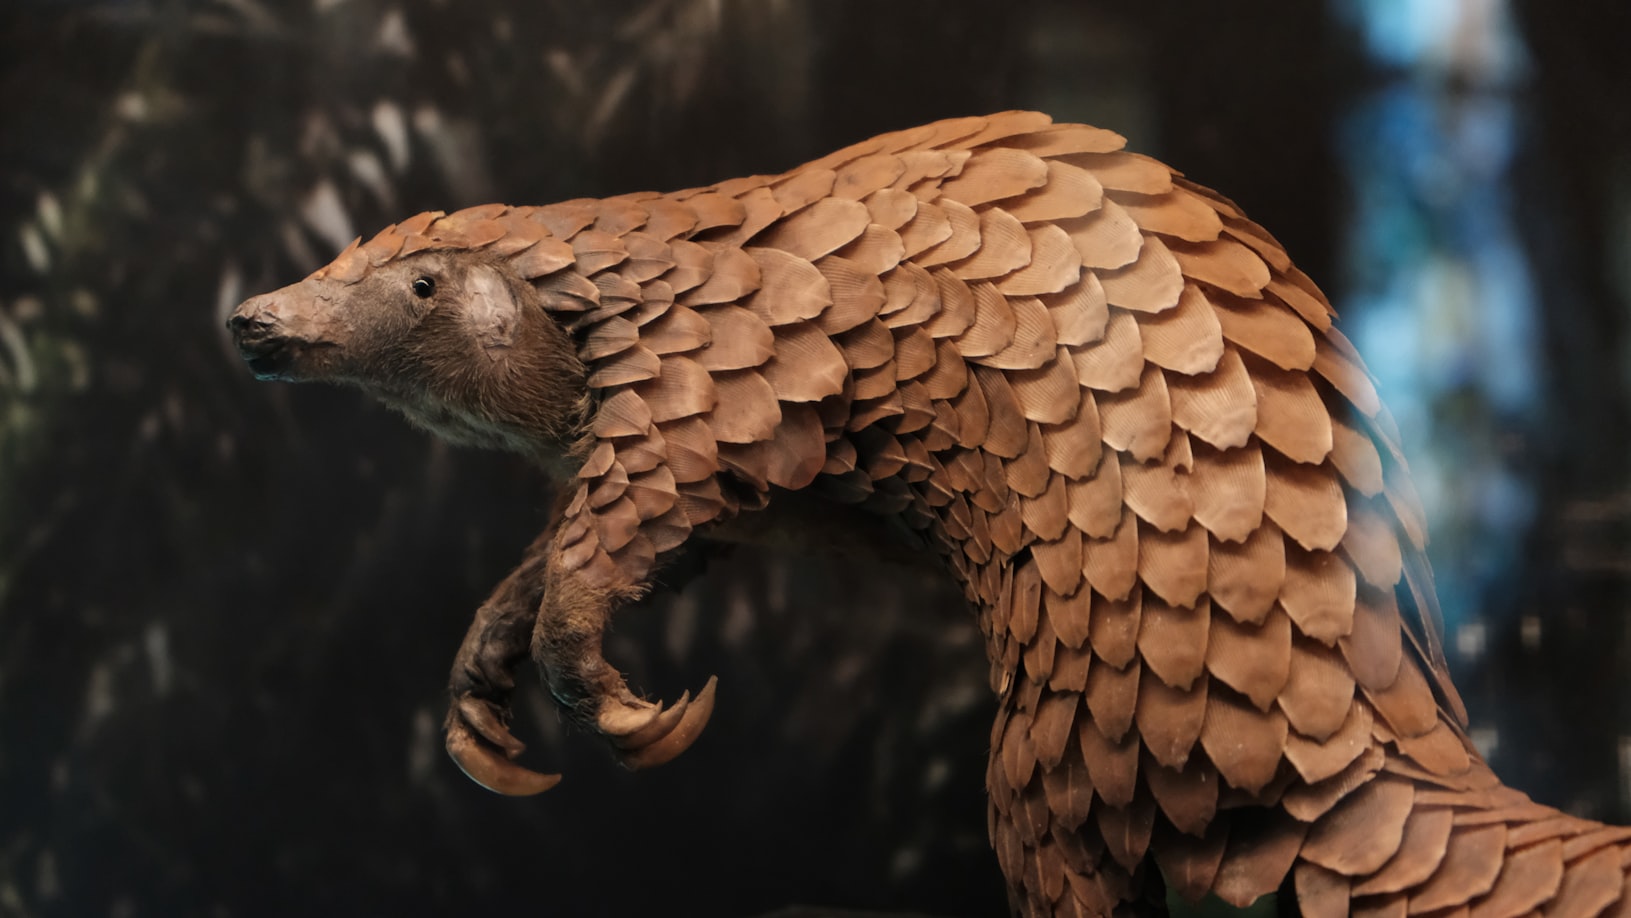 The Pangolin: The most trafficked mammal